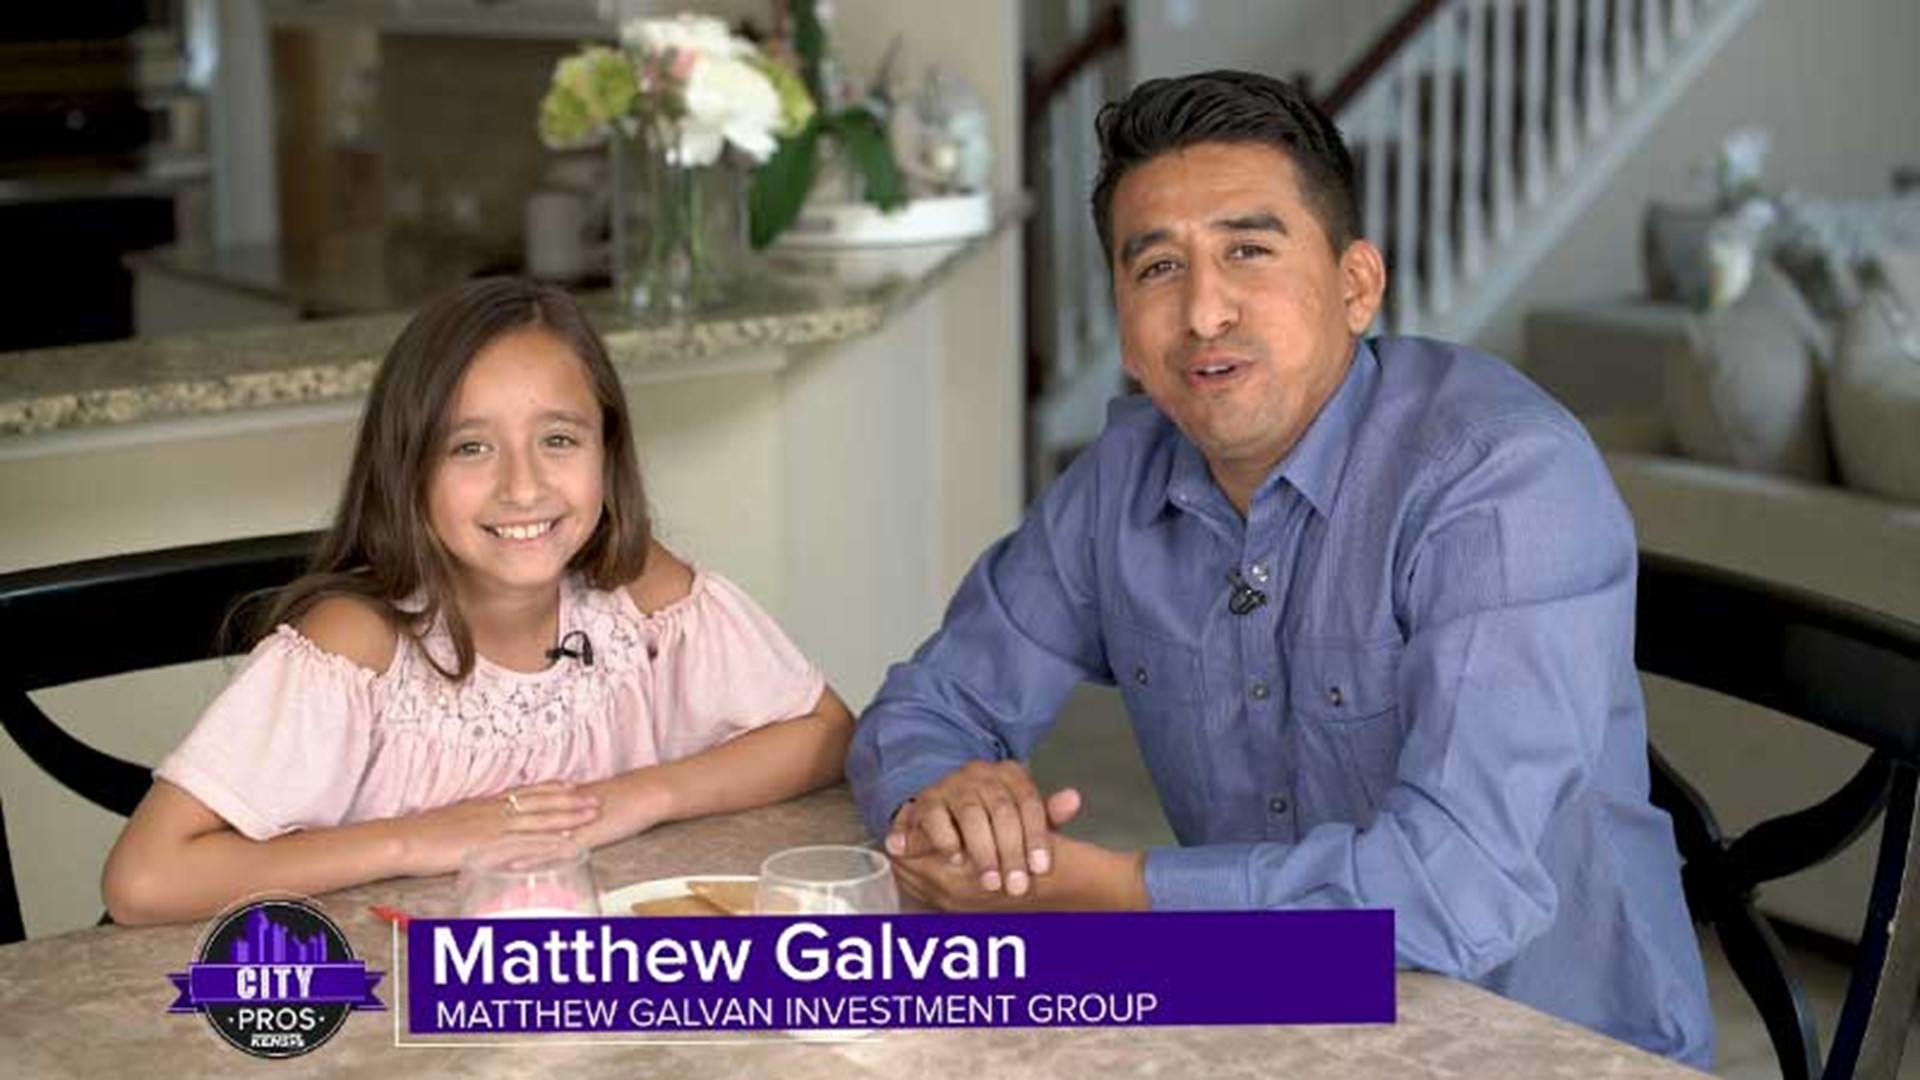 Matthew Galvan explains why it can be advantageous to sell your home to an investor rather than working with a real-estate agent. Matthew Galvan Investment Group is your partner for getting money for your home now, not later.